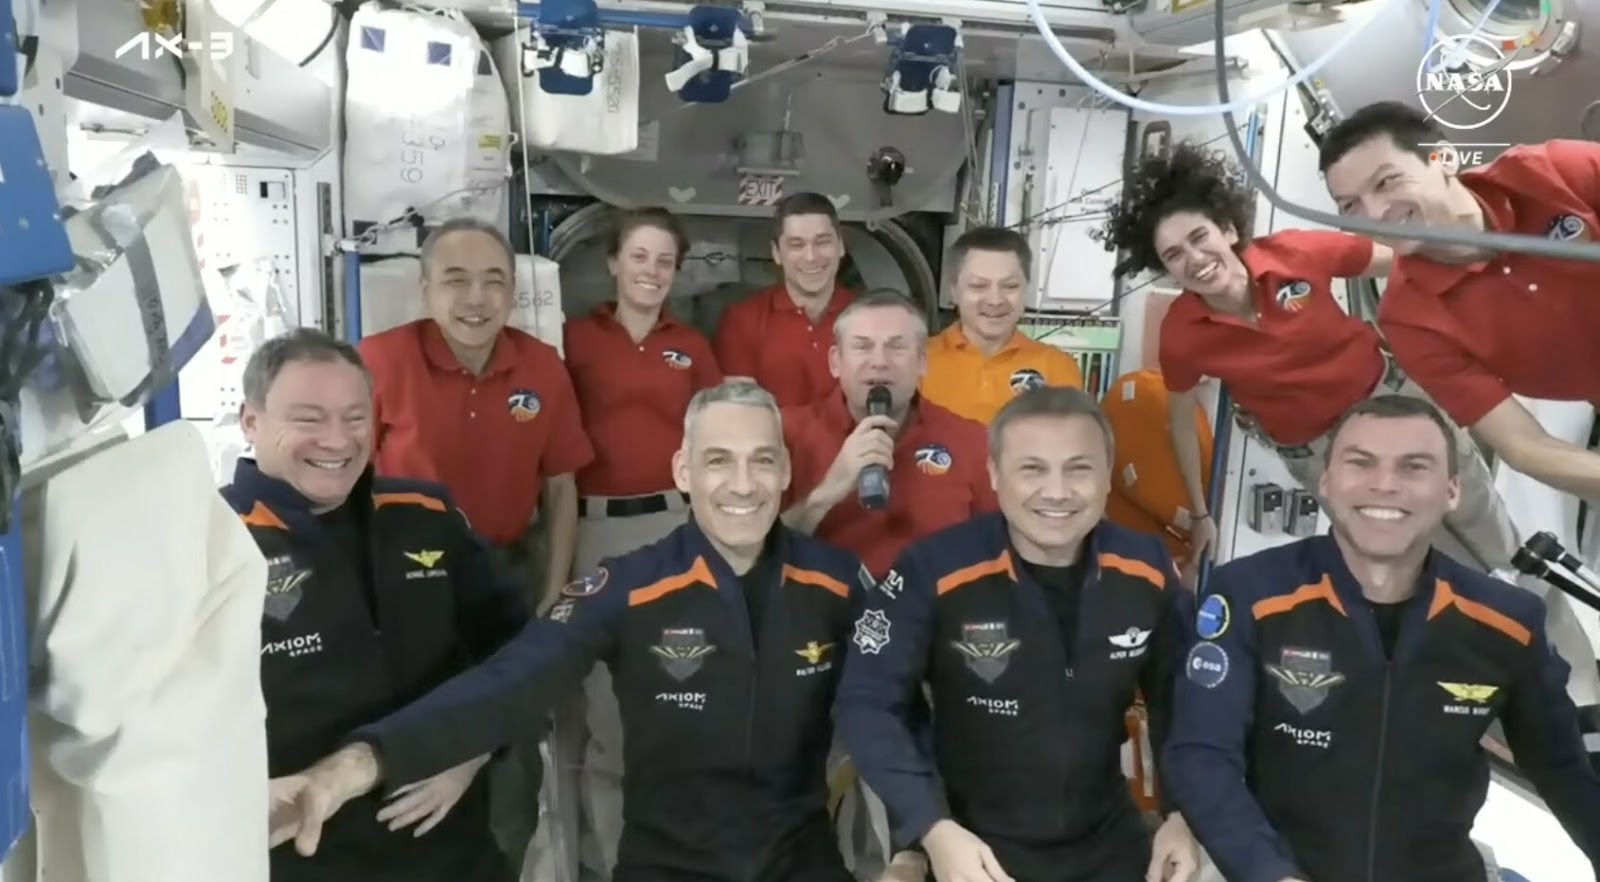 A group of people posing in the international space station.